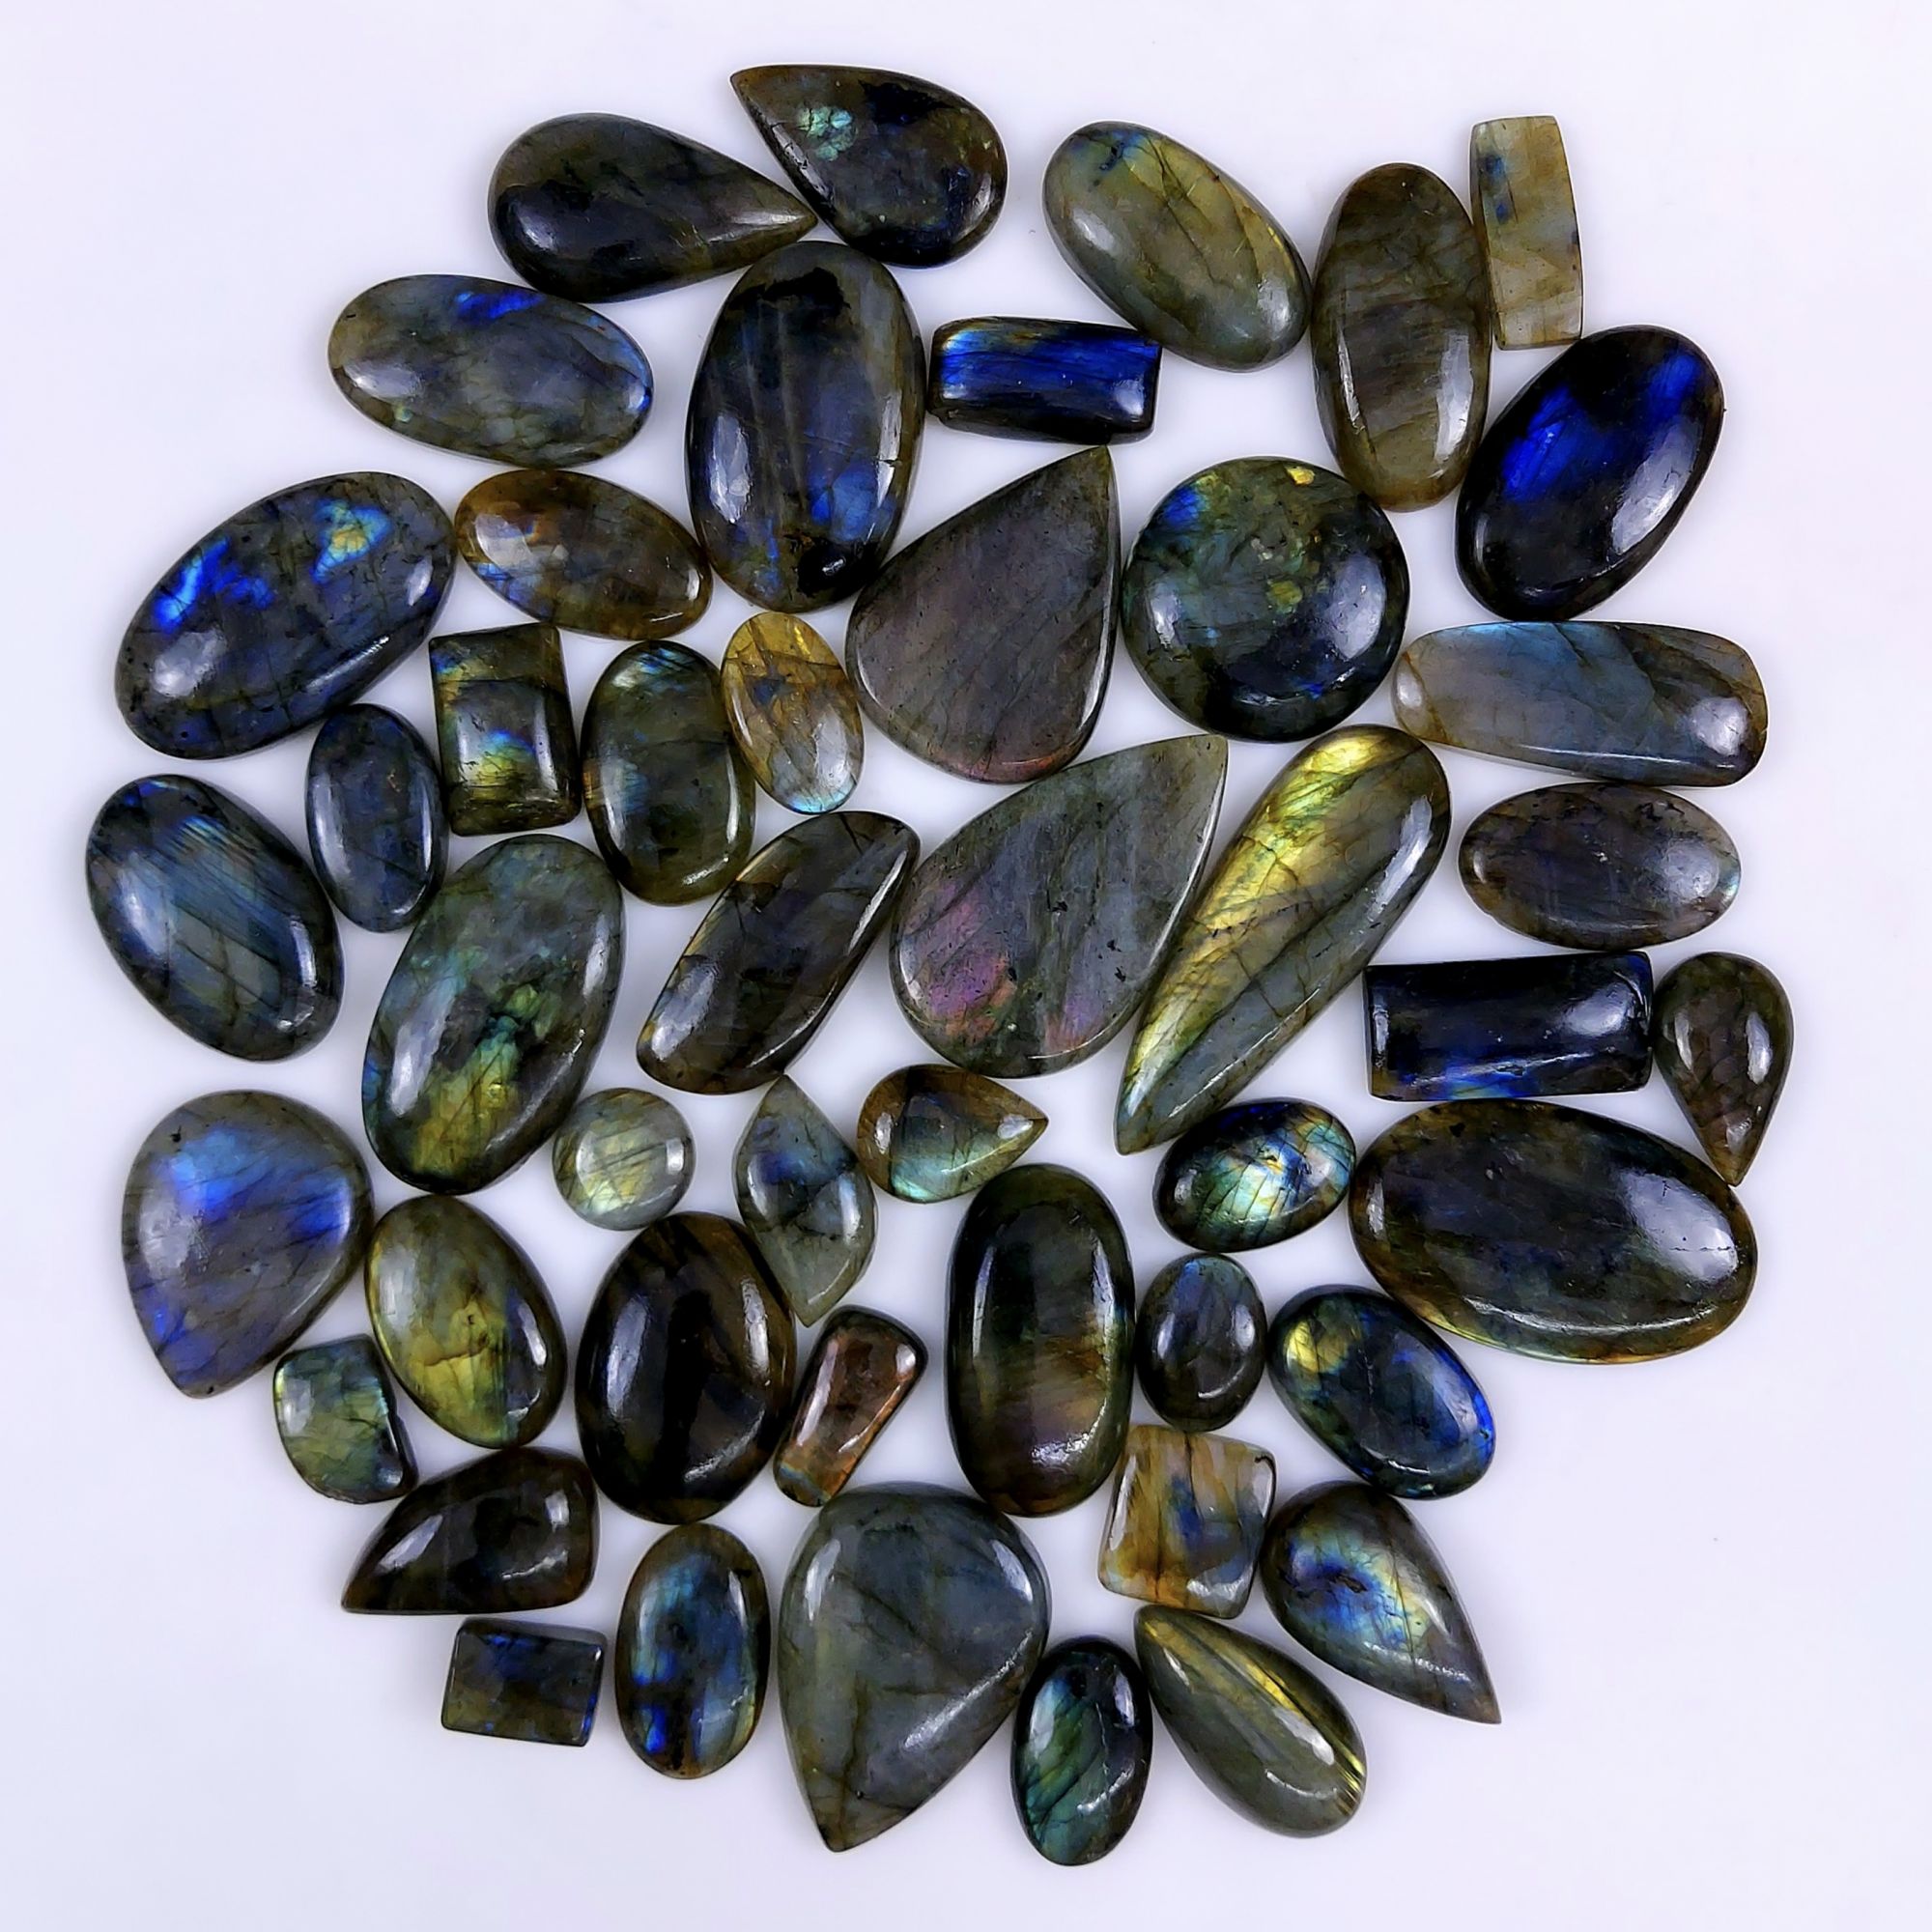 47pc 1723Cts Labradorite Cabochon Multifire Healing Crystal For Jewelry Supplies, Labradorite Necklace Handmade Wire Wrapped Gemstone Pendant 57x20 16x16mm#6275